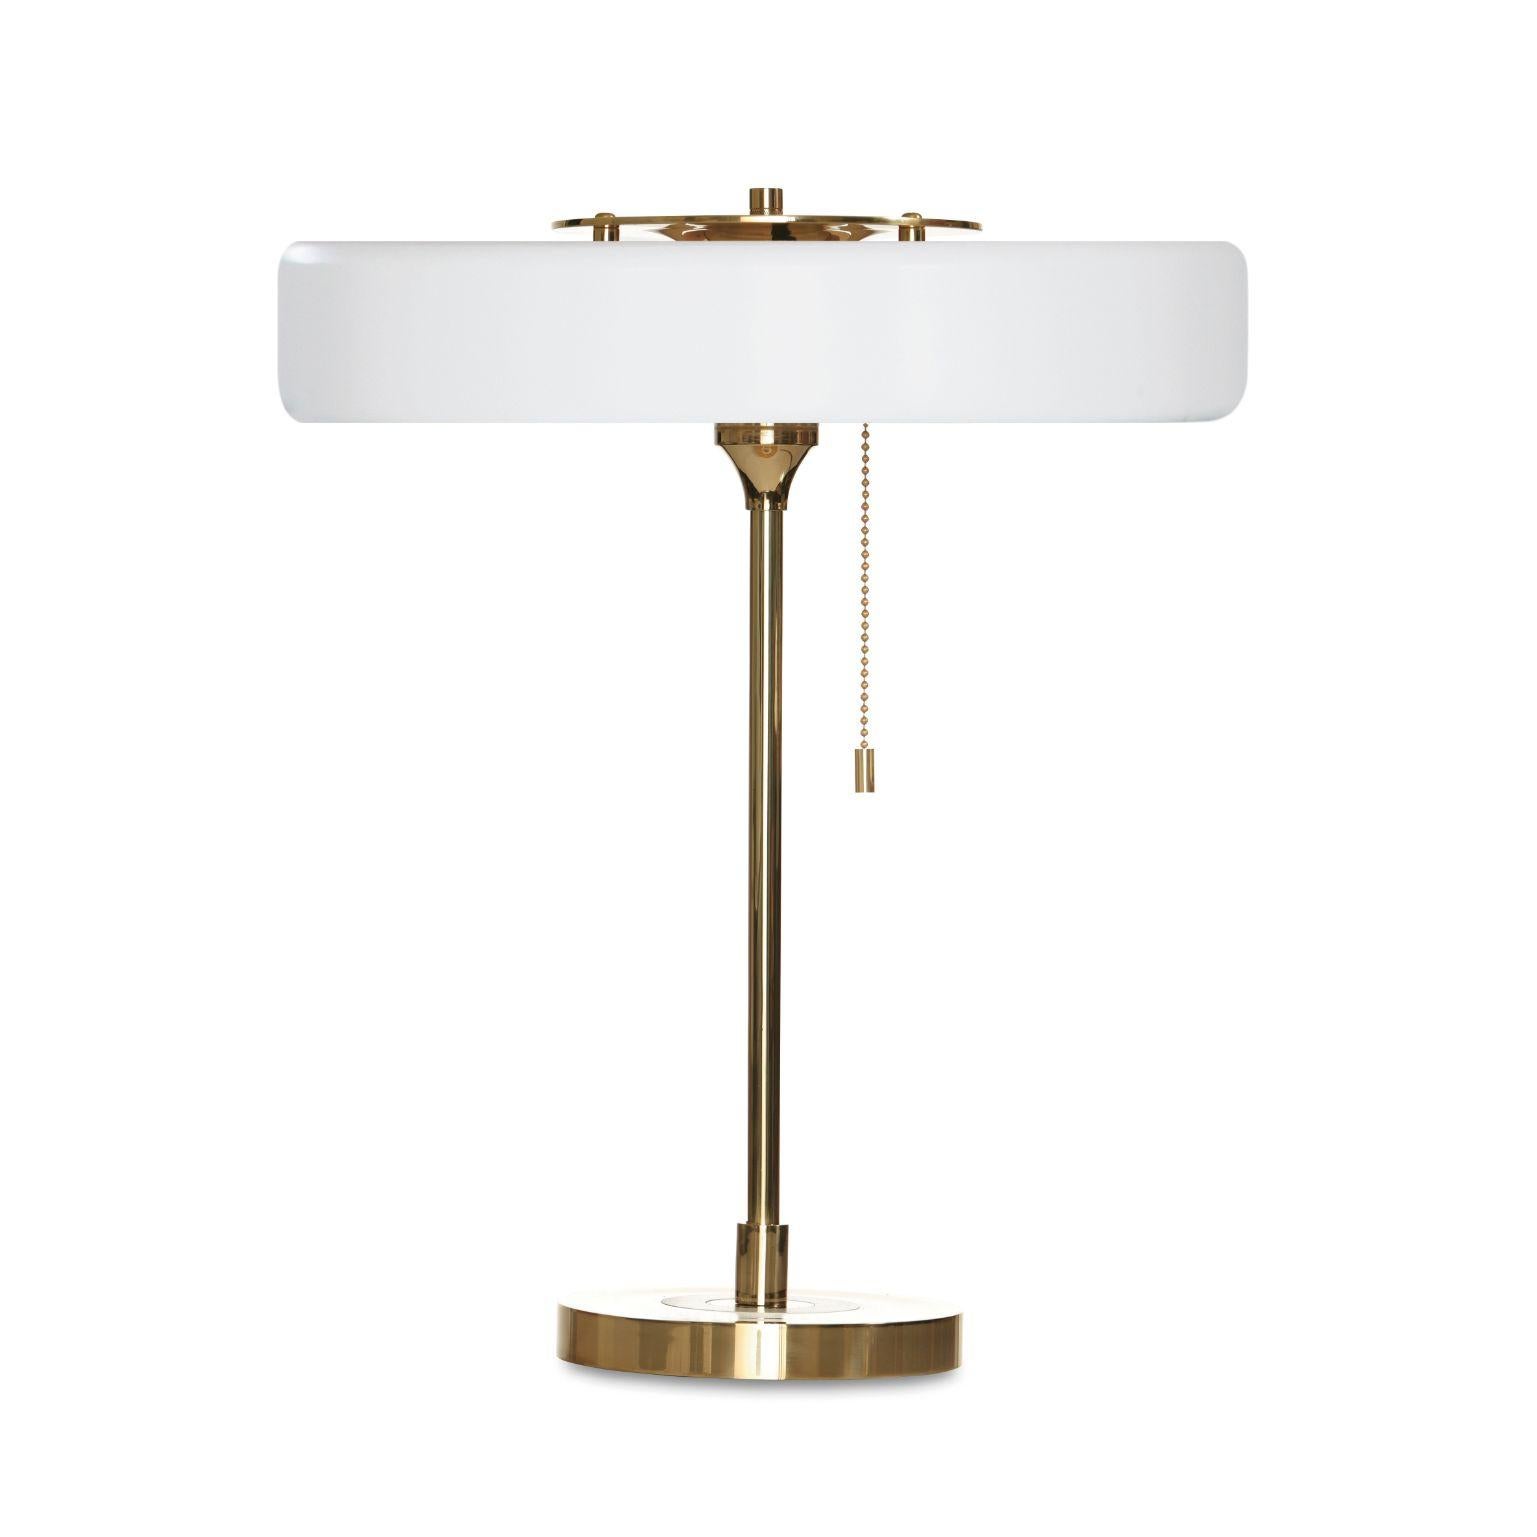 Revolve table lamp - Polished brass - White by Bert Frank
Dimensions: 42 x 35 x 15 cm
Materials: Brass, steel

Also available in brushed brass

When Adam Yeats and Robbie Llewellyn founded Bert Frank in 2013 it was a meeting of minds and the start